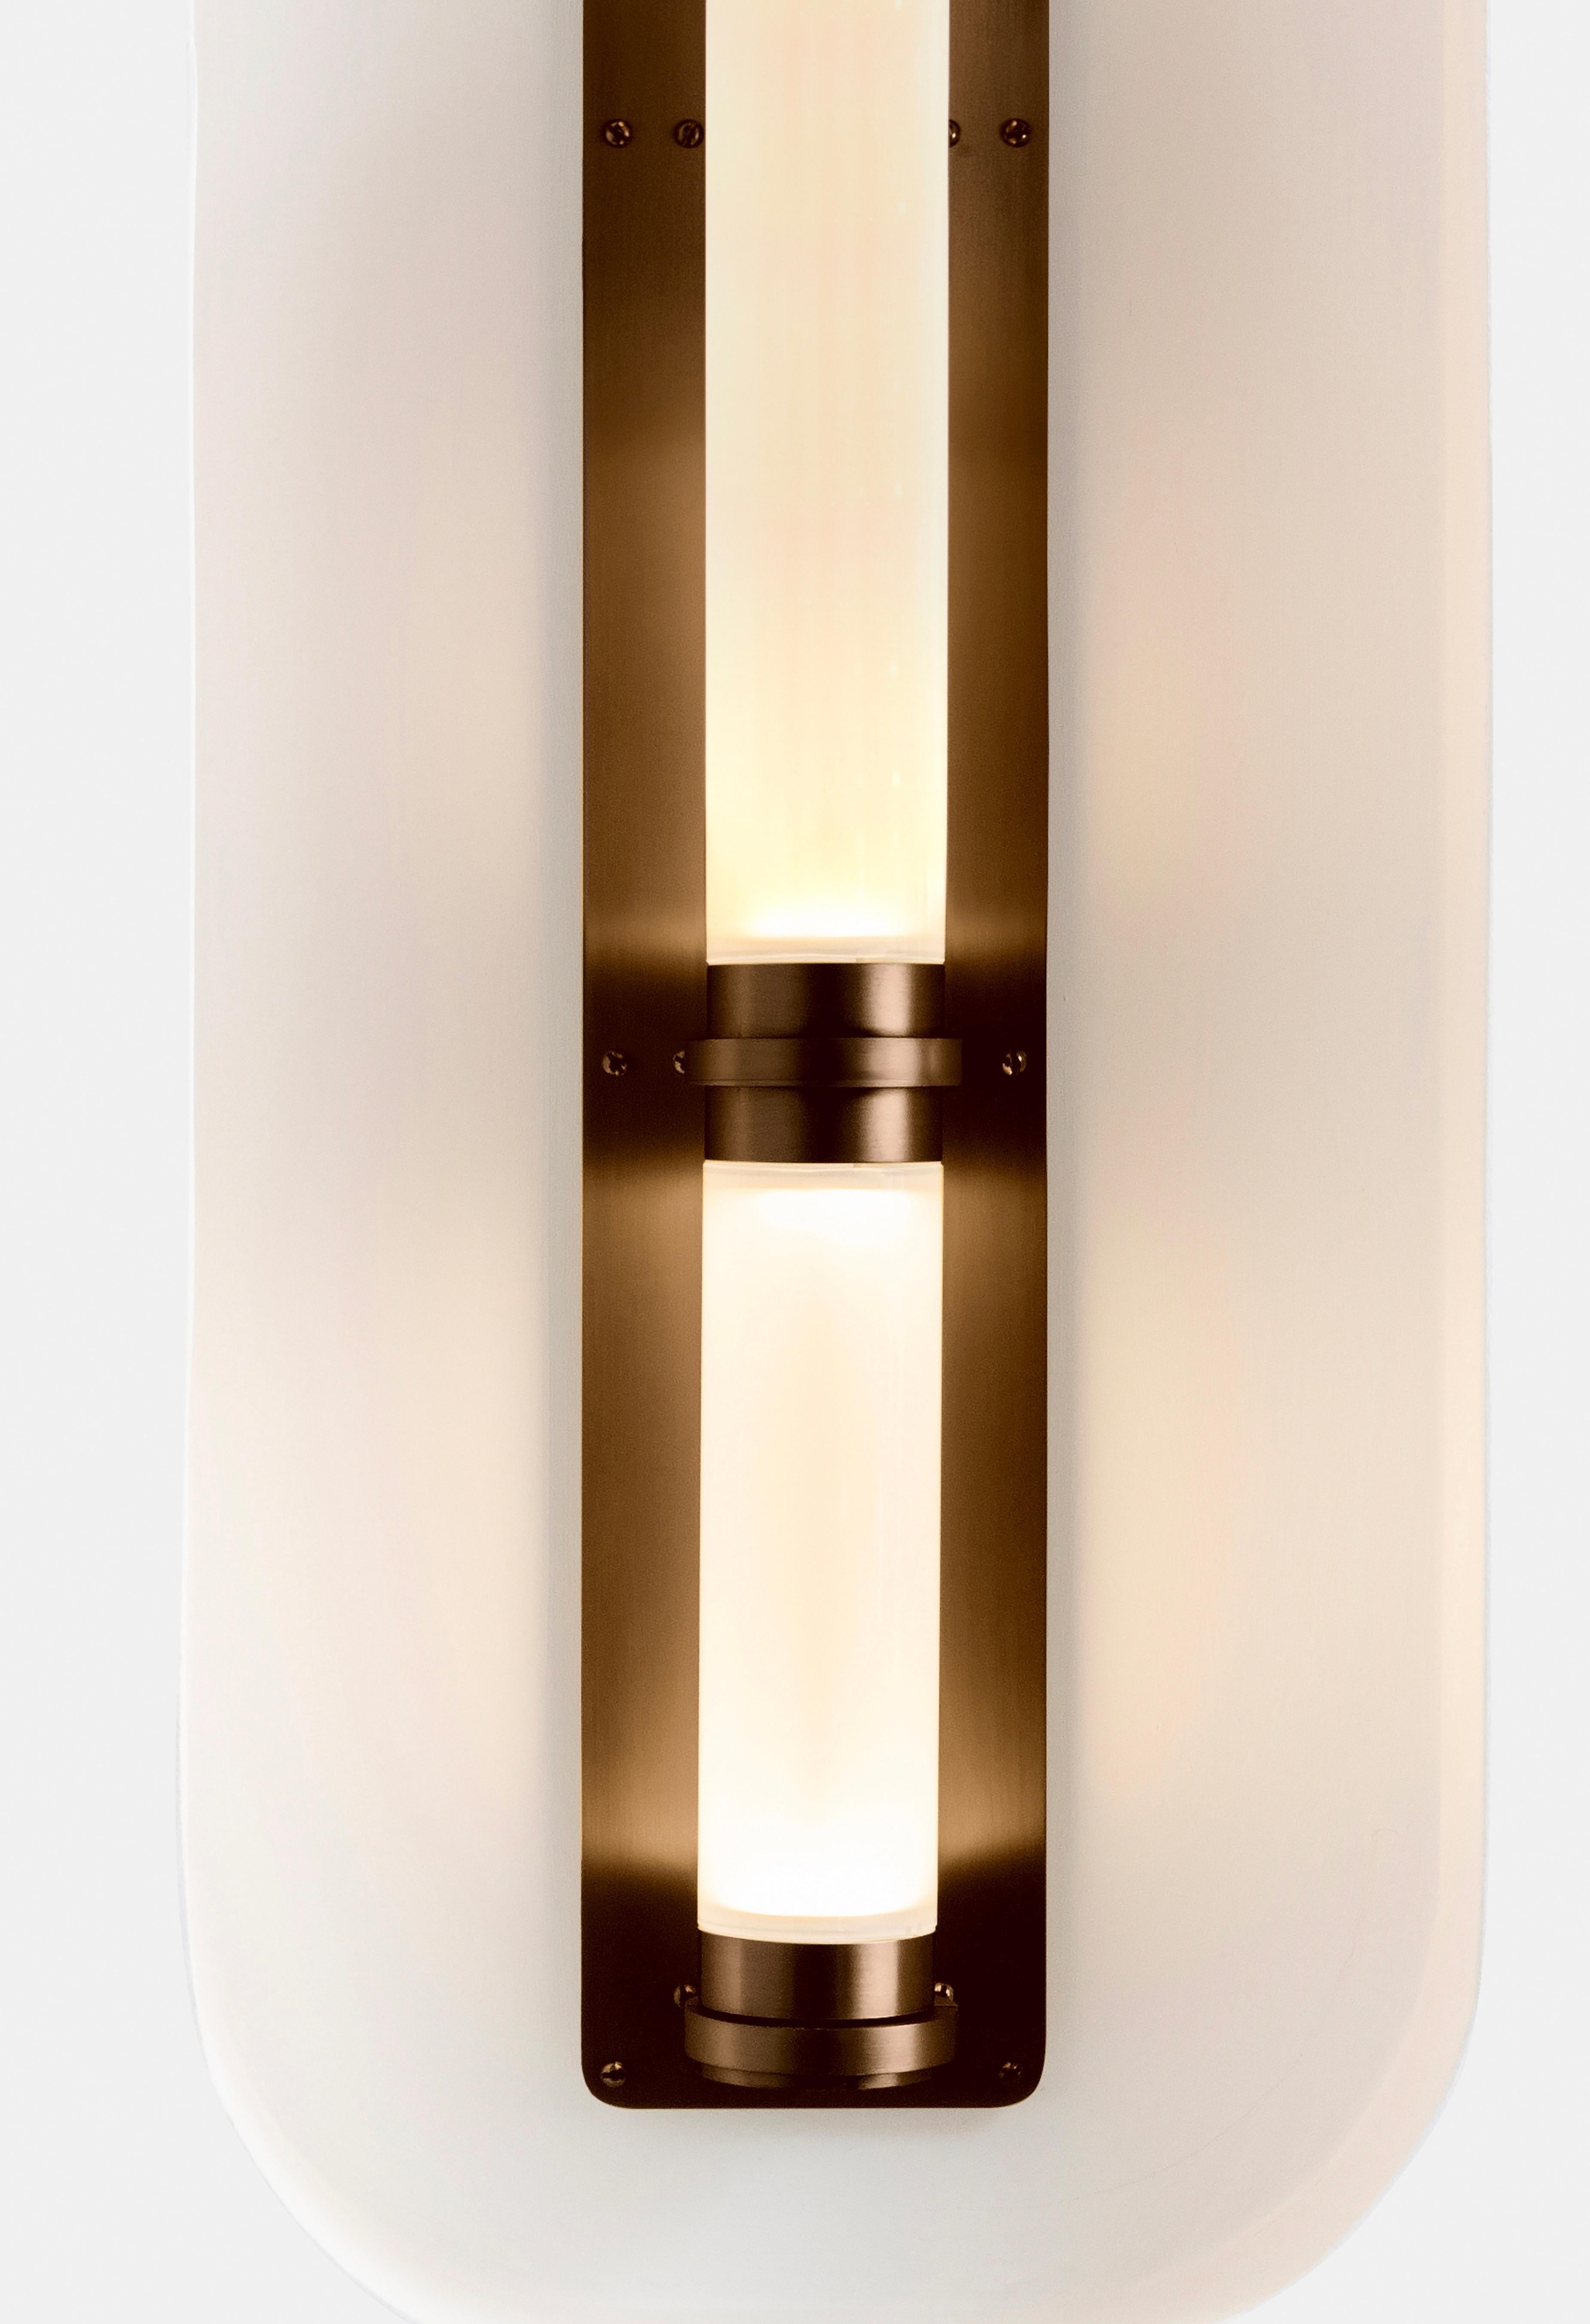 A lighting system with infinite interpretations, the Luna Sconce is an elegant and refined lighting option. Handmade with Gabriel Scott's signature metal and glass combination, this is one of the studio's most popular sconce options.
